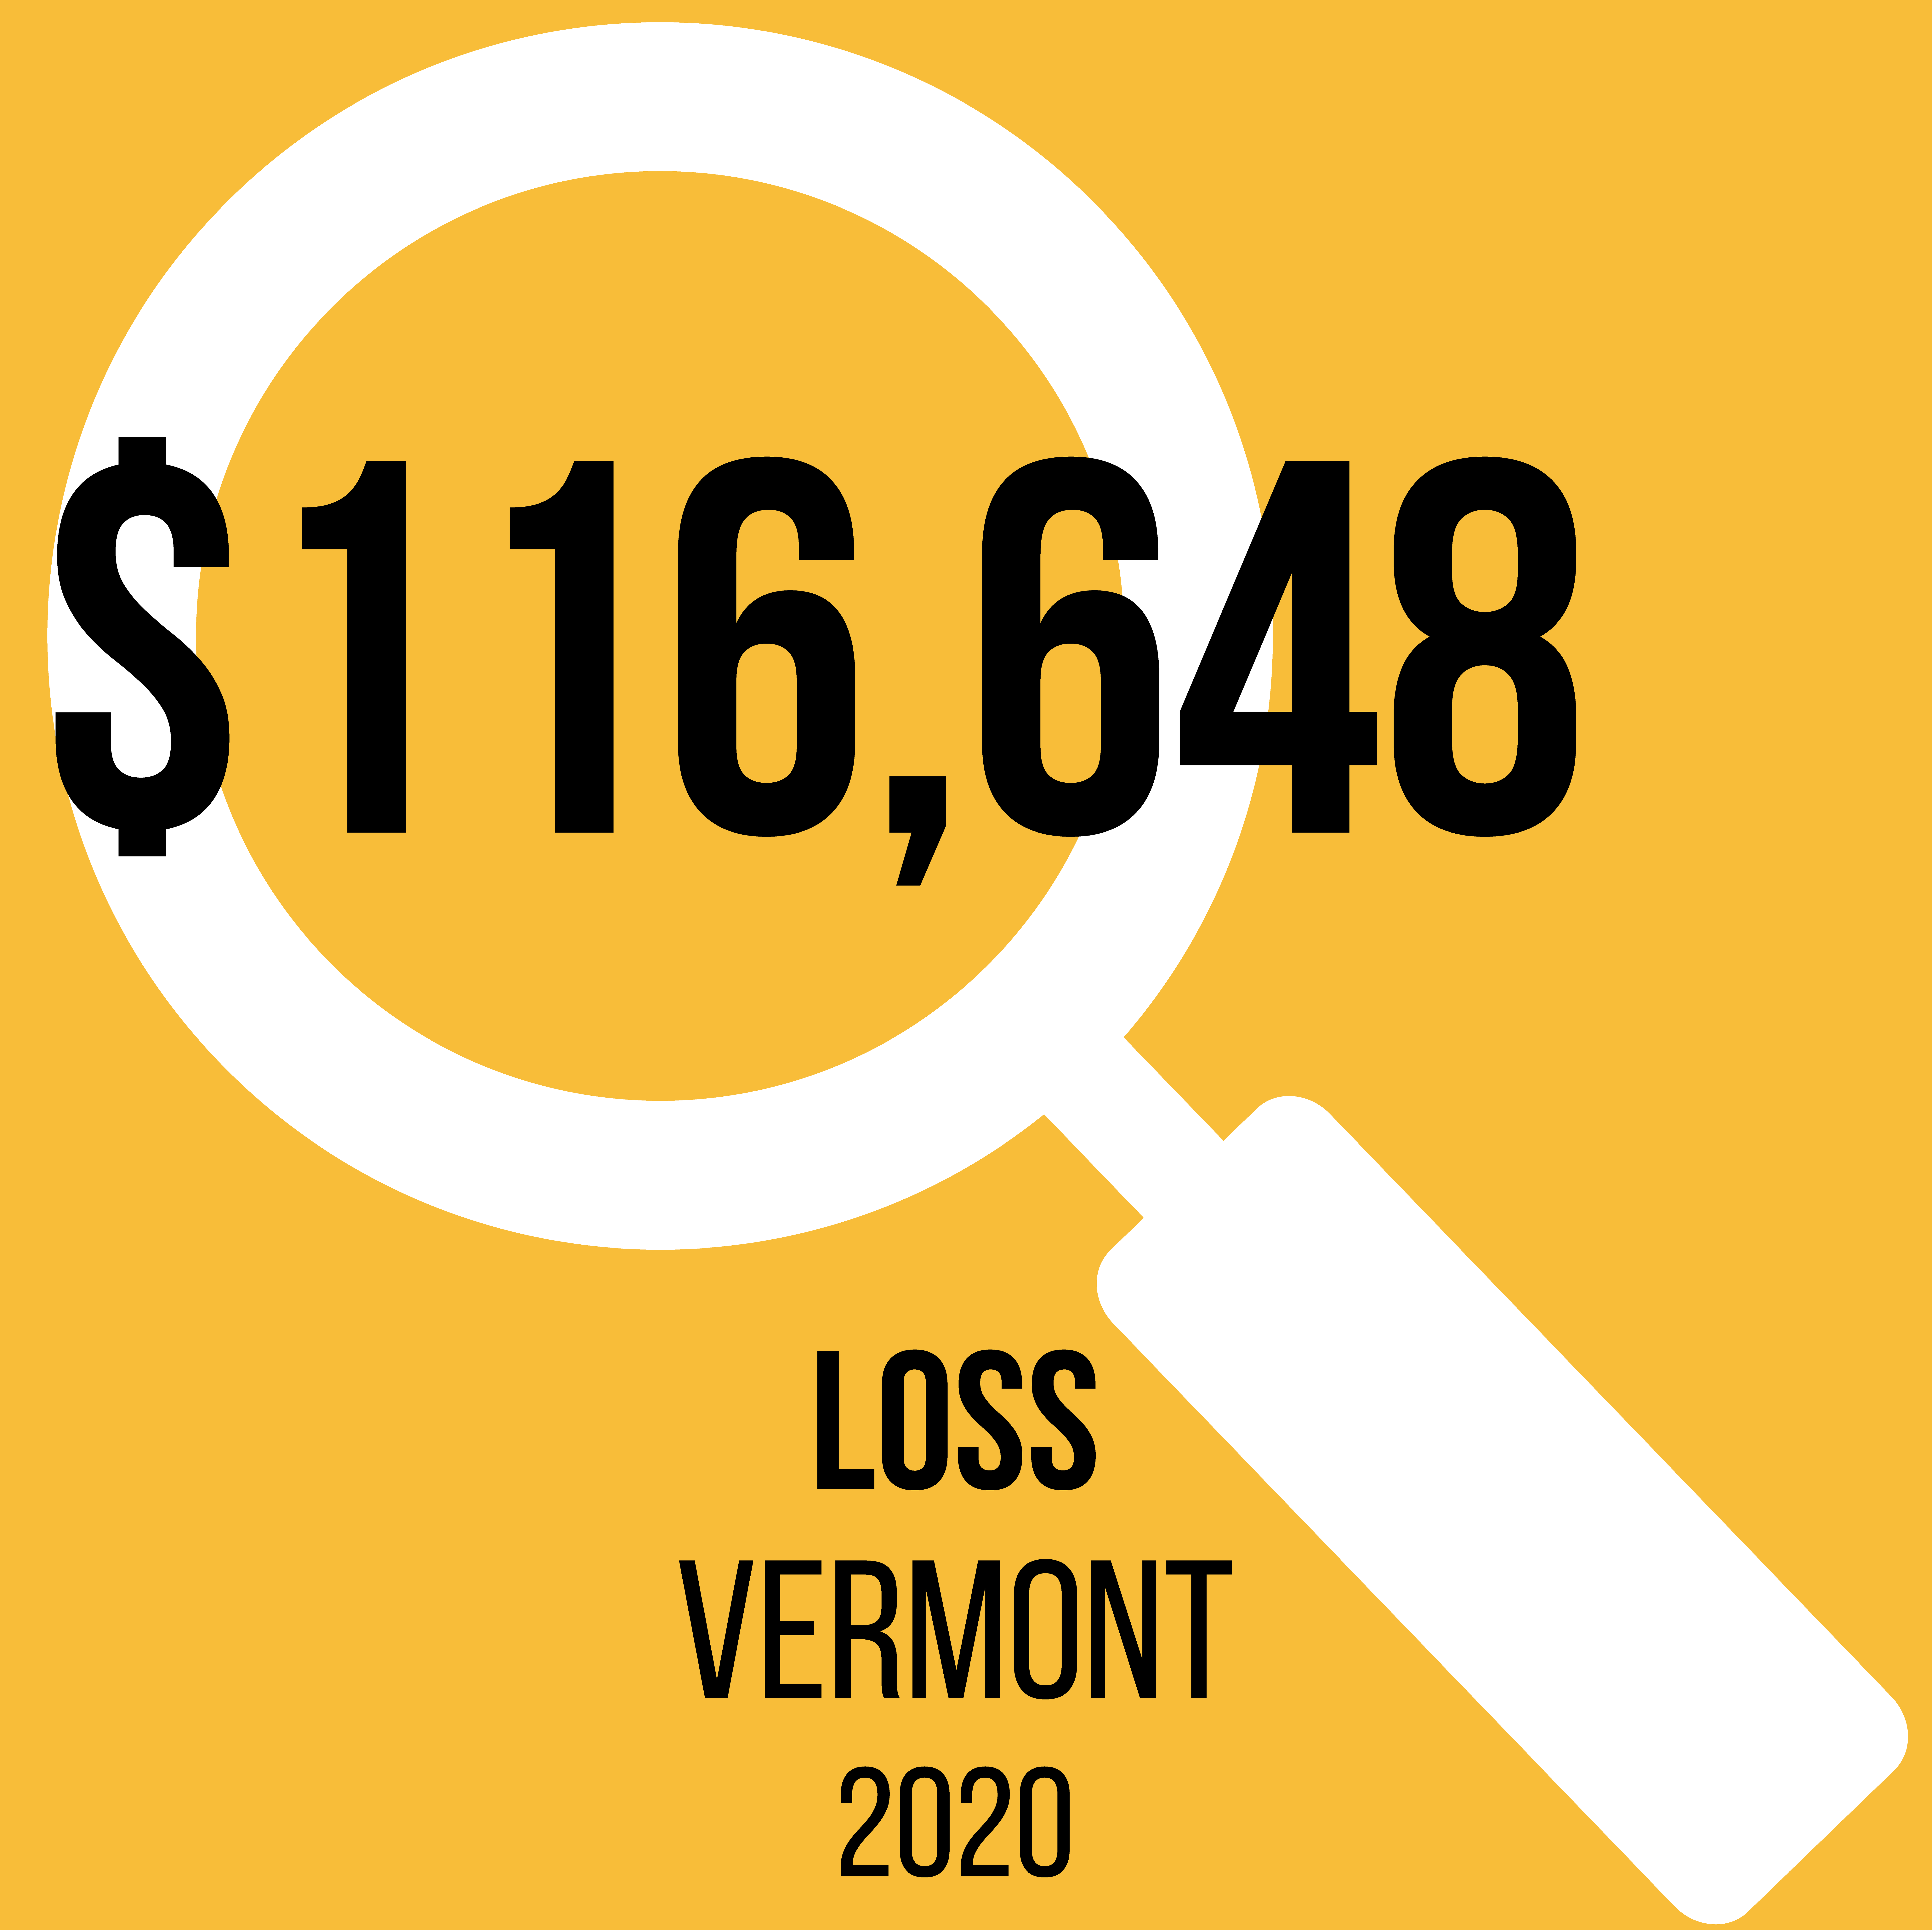 Business Imposter Scam loss reported in VT in 2020